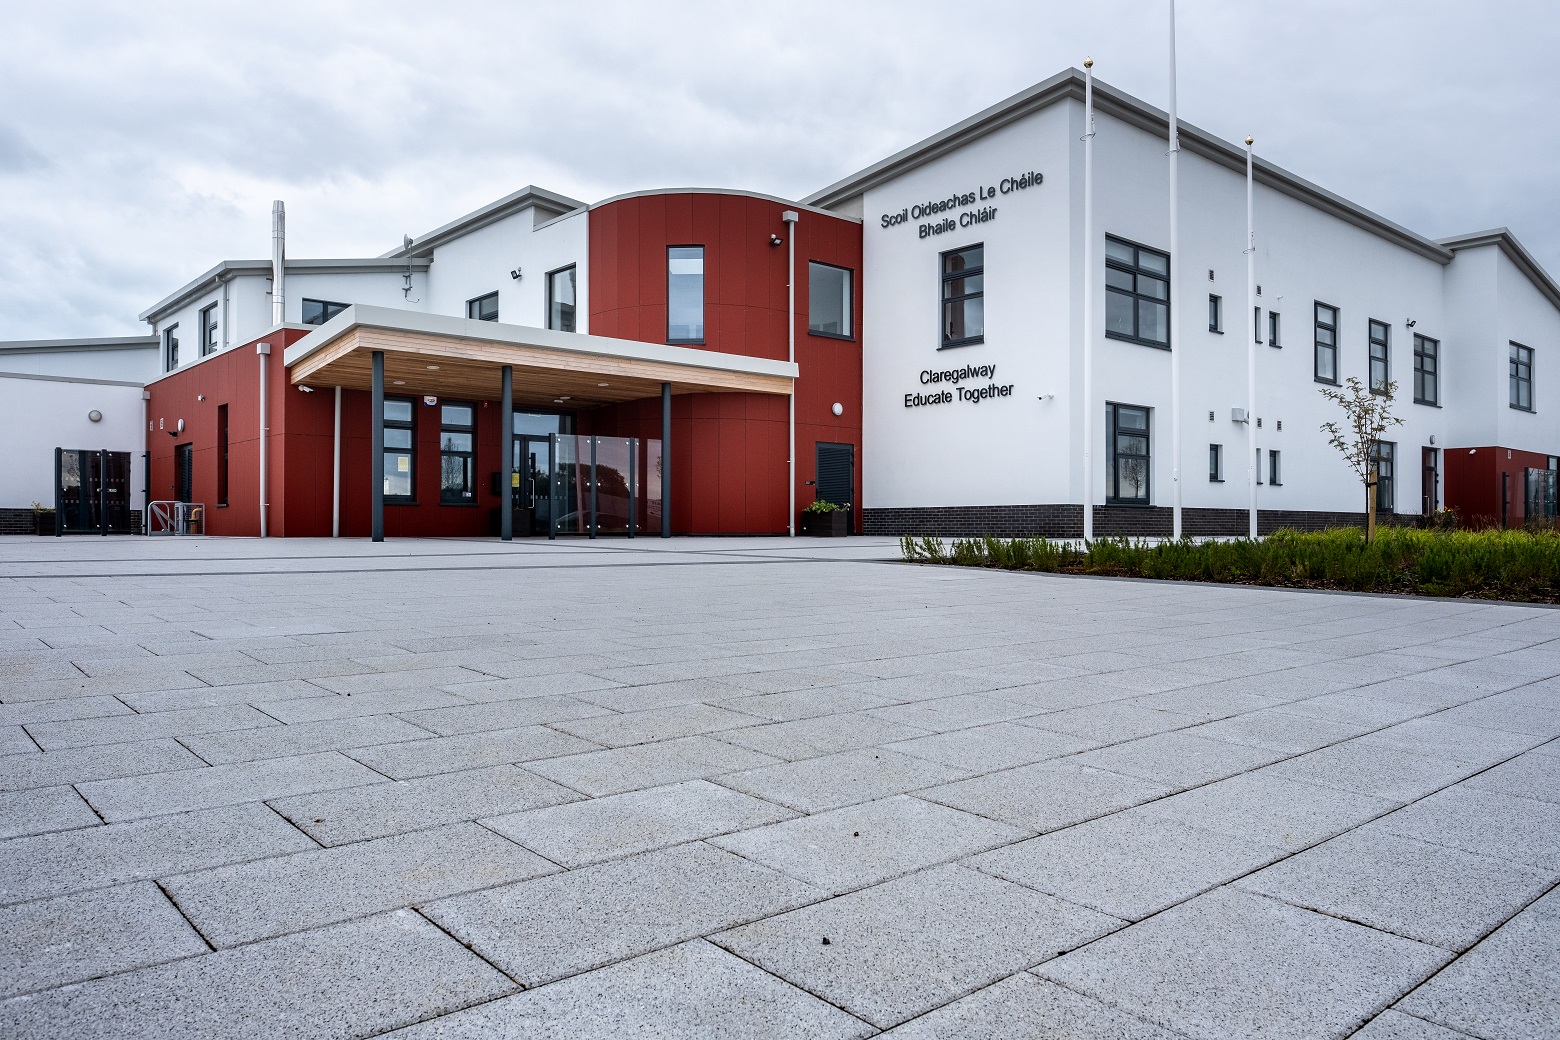 Completion of Claregalway education campus